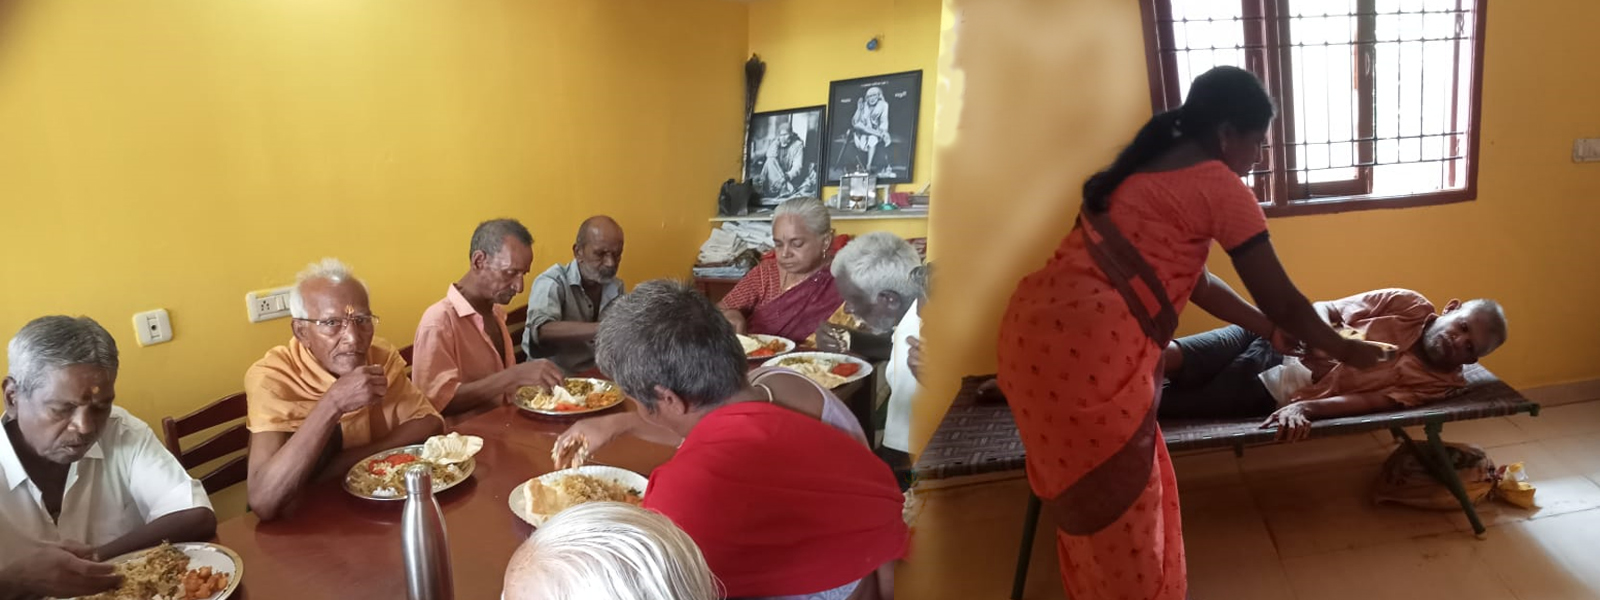 helping hands trust in thiruvallur, holistic old age care in chennai